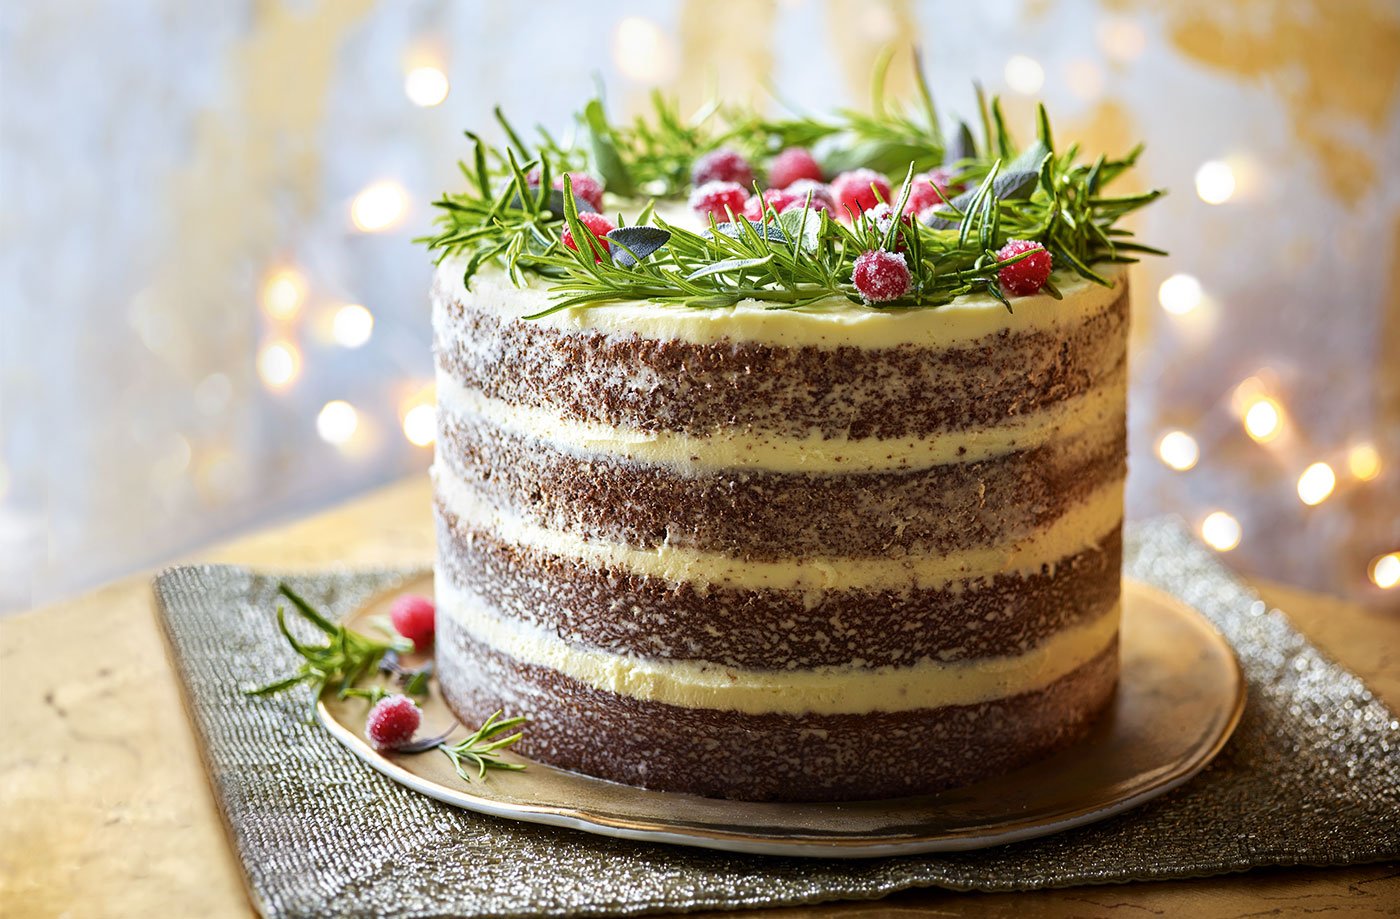 Top 7 Places In Delhi Doing The Best Christmas Desserts